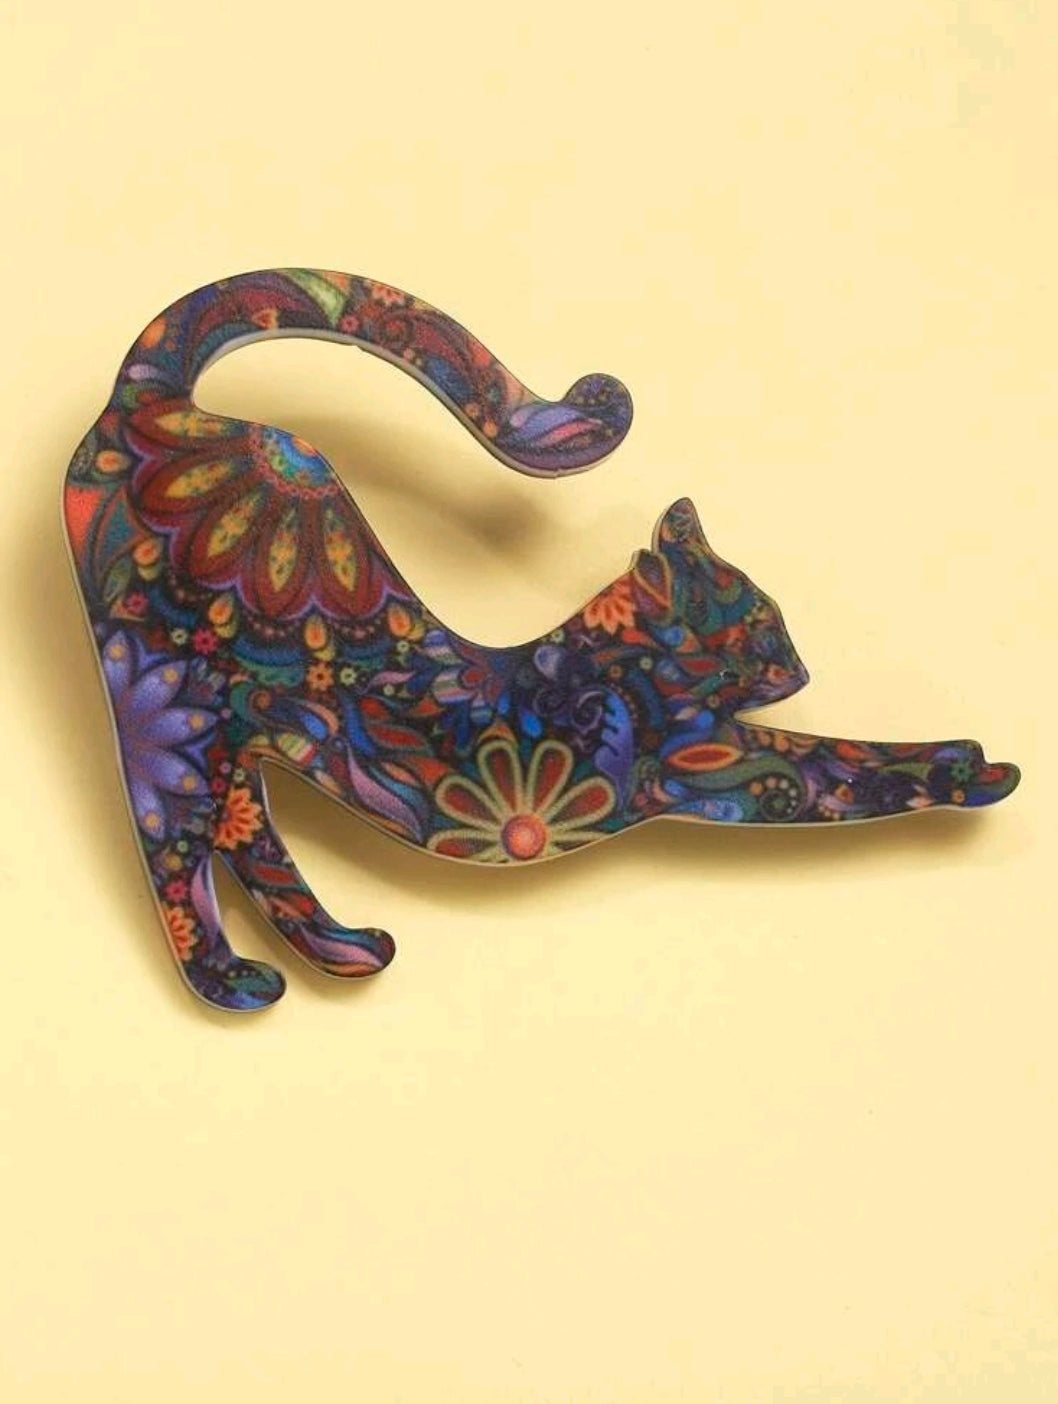 Colored brooch cat. Suitable for any type of dress, fashionable and highly requested by cat lovers. Match it with your clothes, it cannot be missing in the collection of your accessories. Adorable gift idea. Color: Multicolor Style: Glam & Casual Type: Brooches Material: Acrylic Size: Height 5.1 cm/2 inch X Width 6.6 cm/2.6 inch Gift bag included